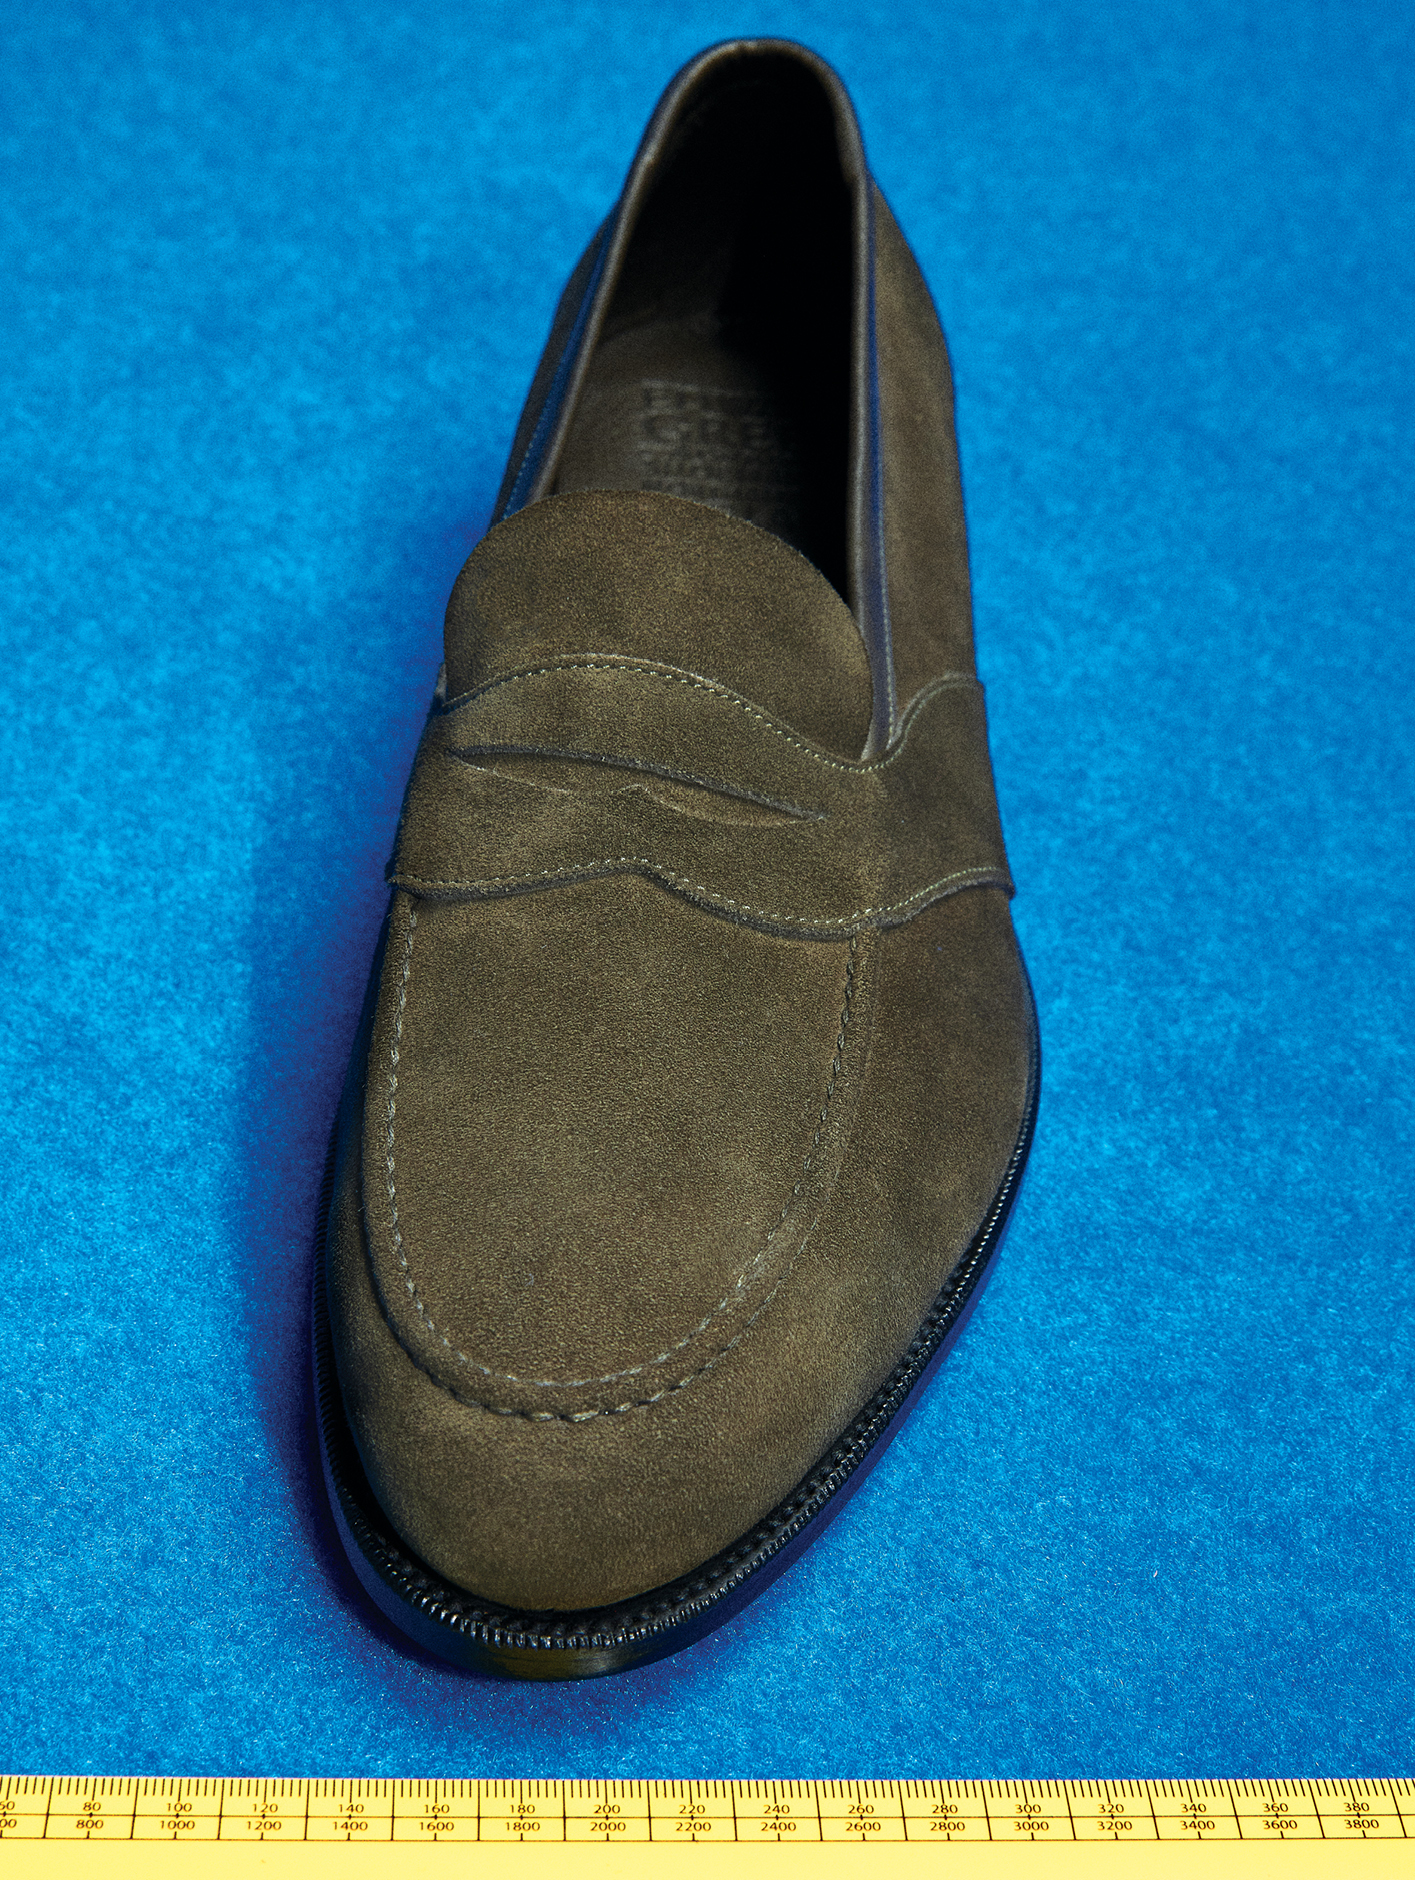 Montpellier unlined suede loafer (photo: Cameron Bensley)